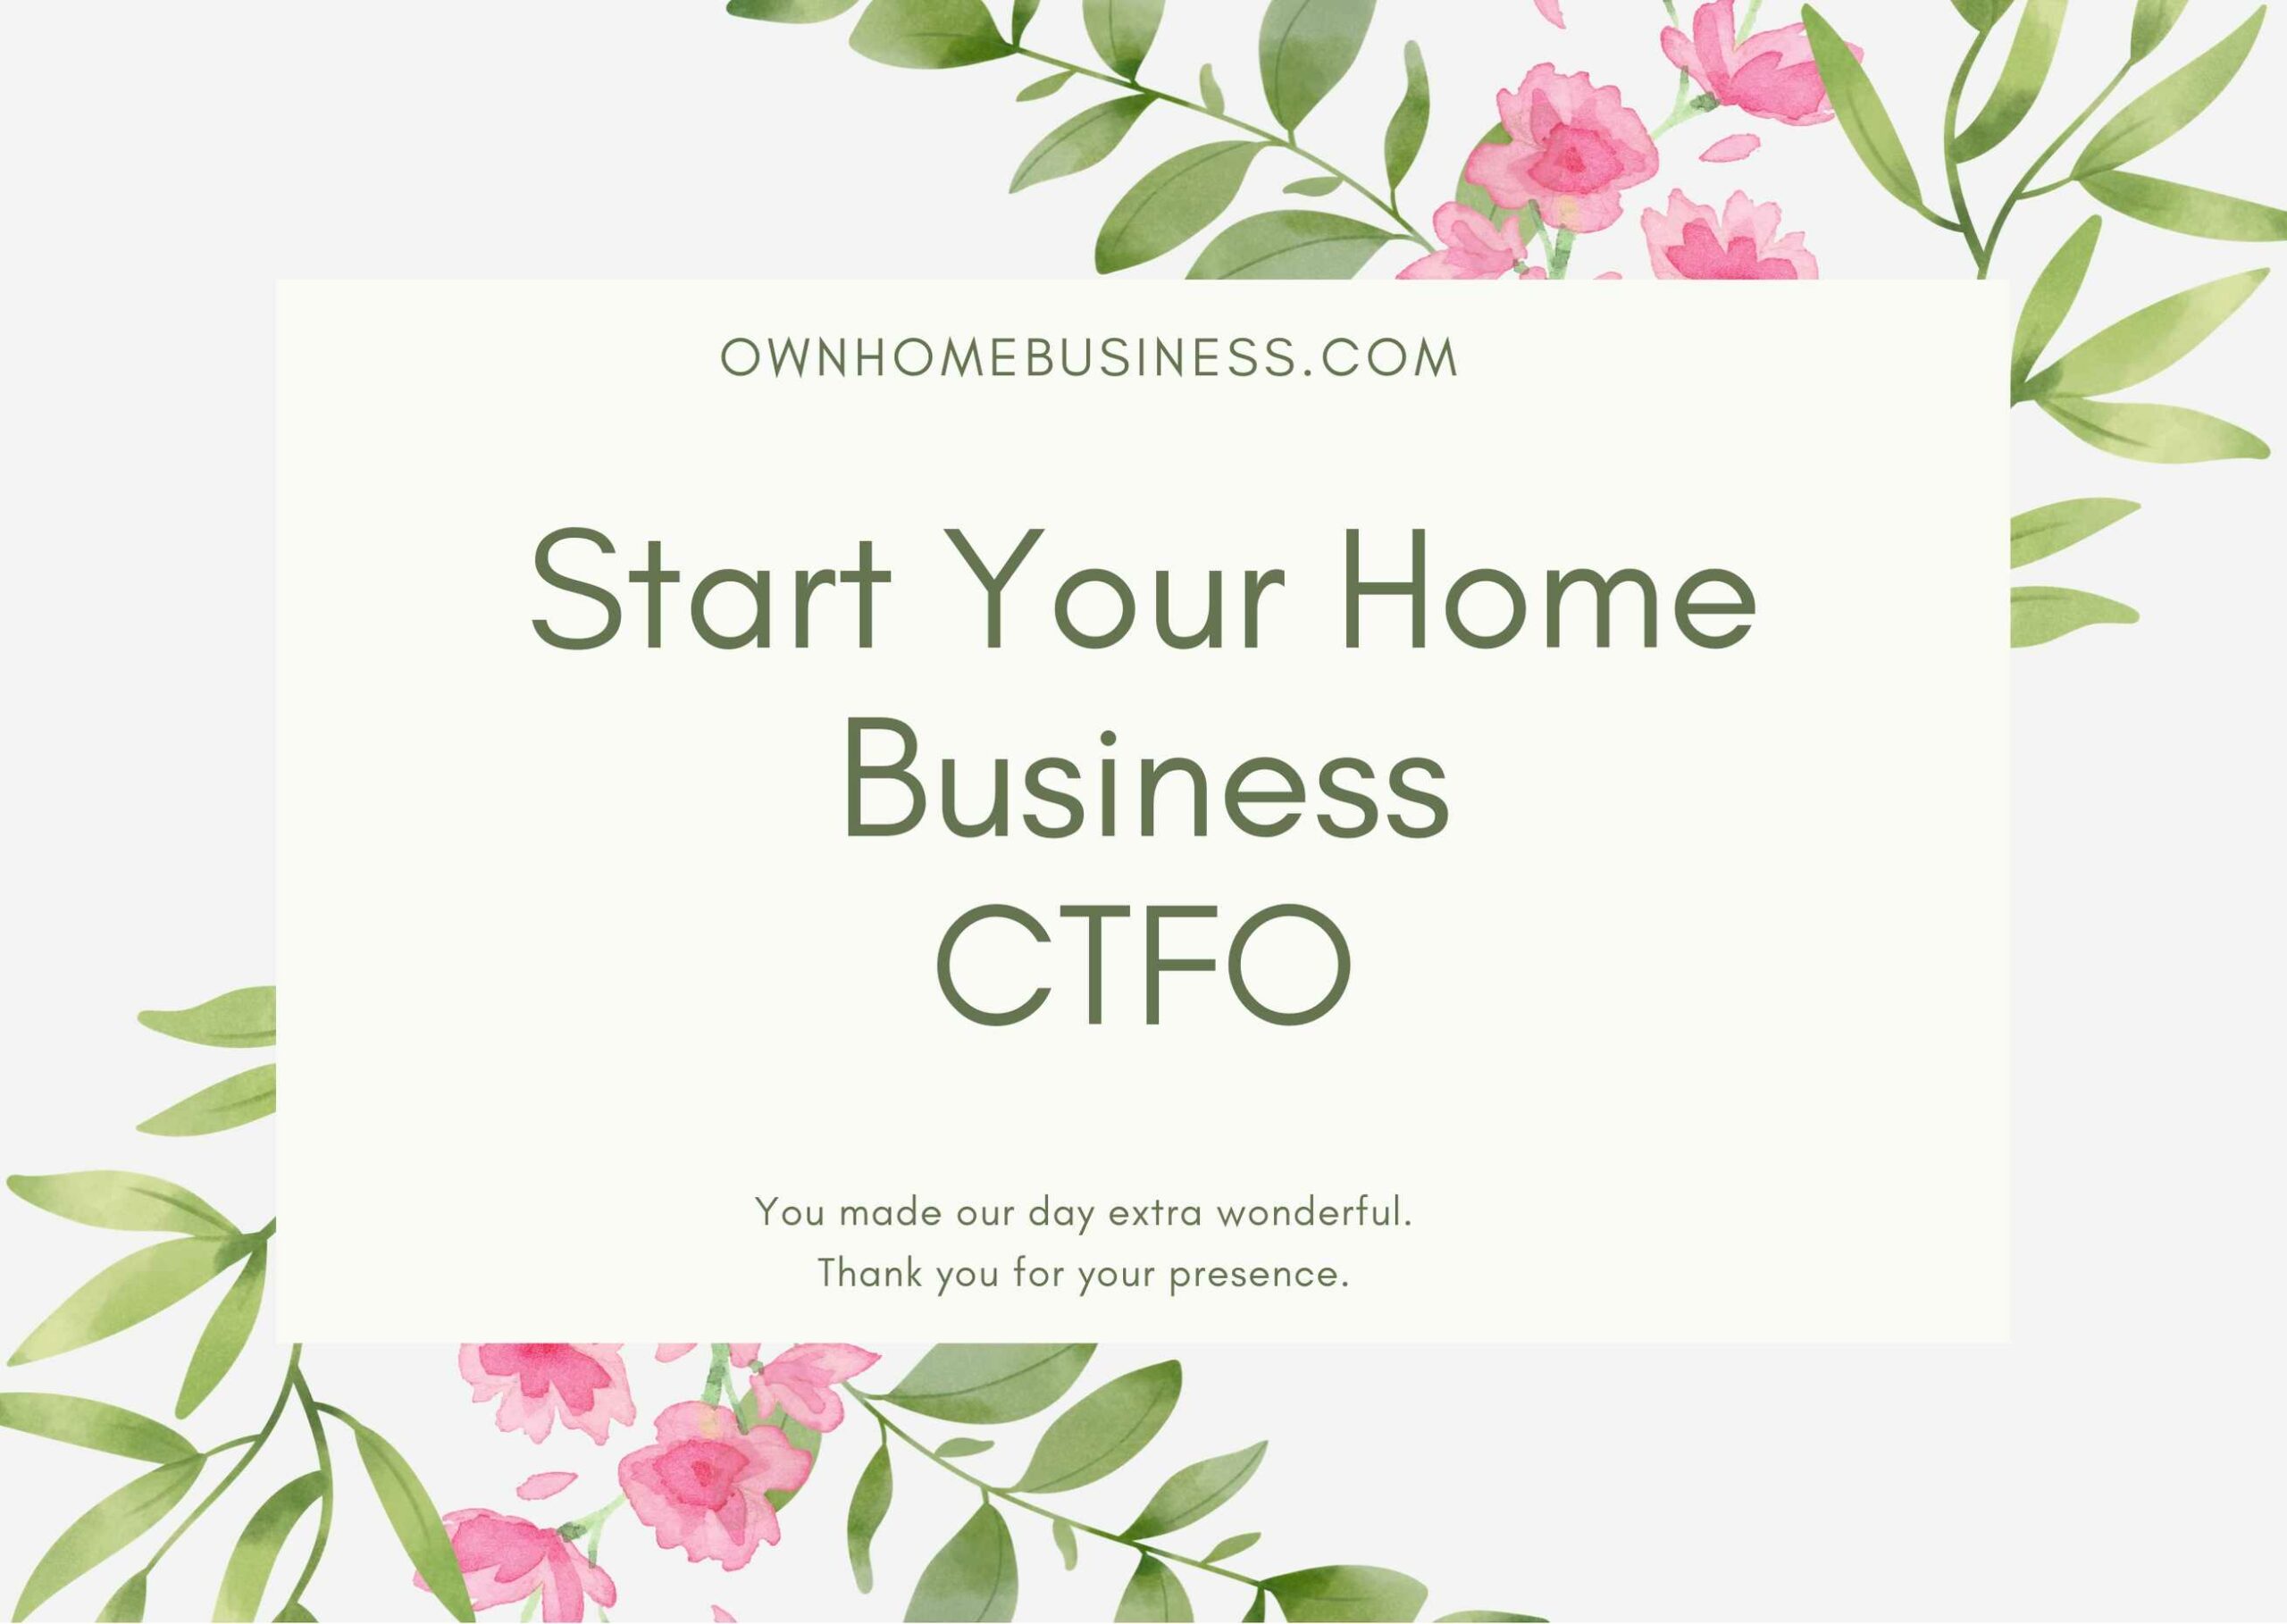 CTFO Review